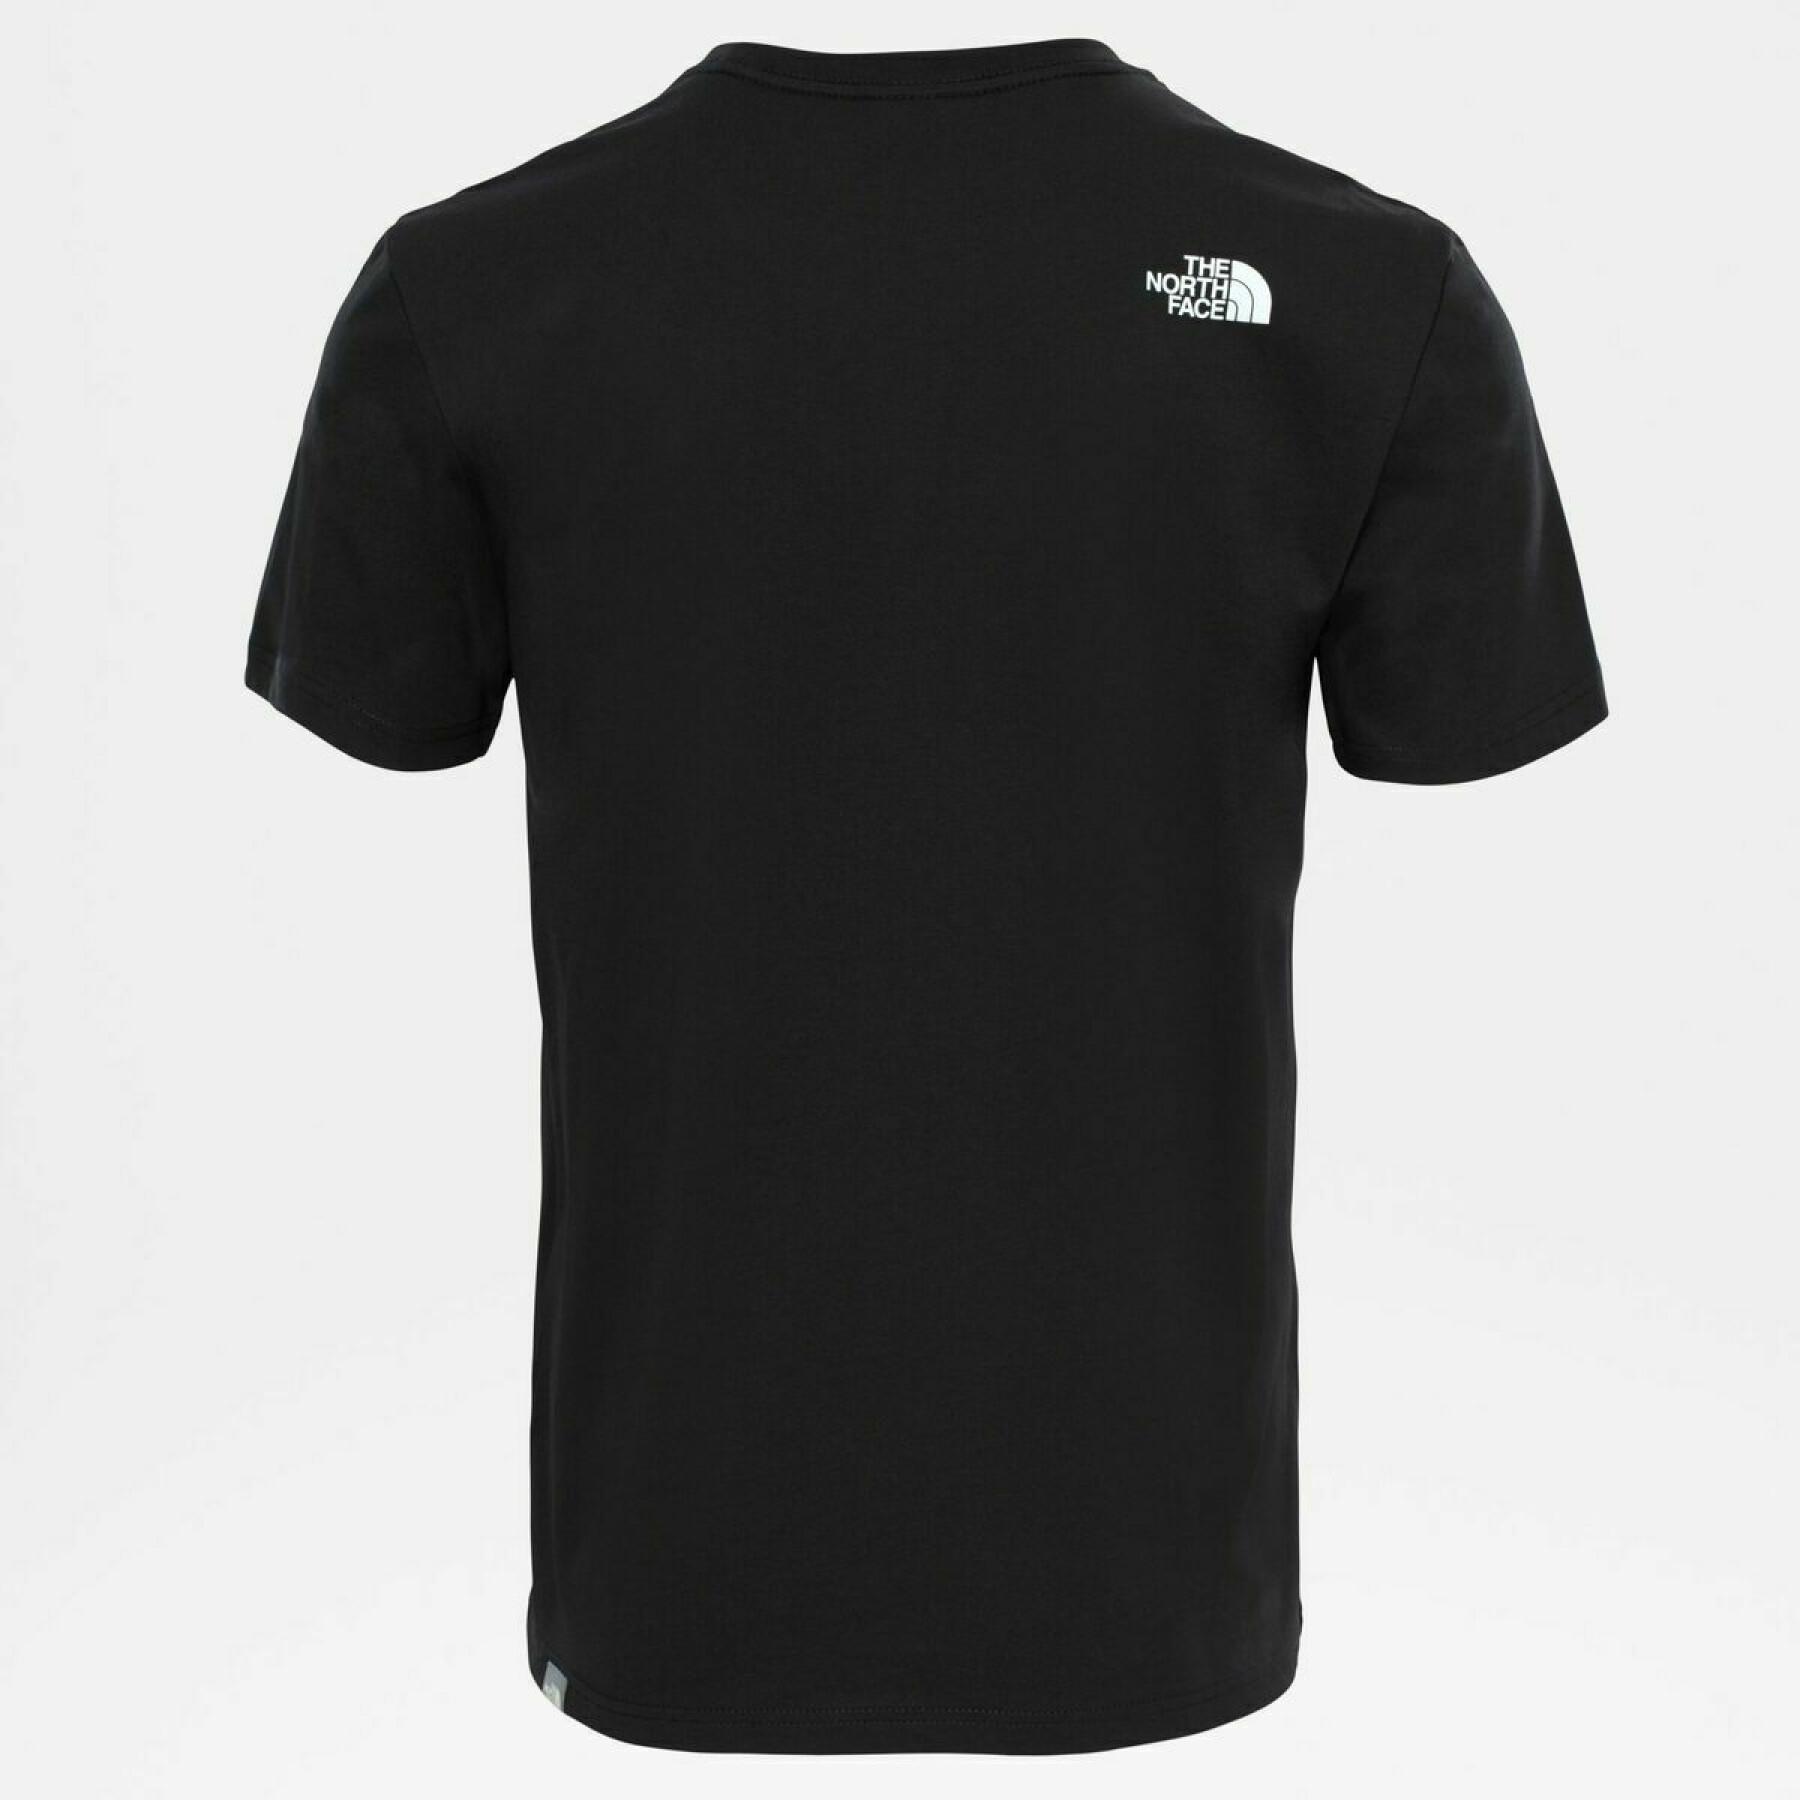 Classic T-shirt The North Face "Never Stop Exploring"